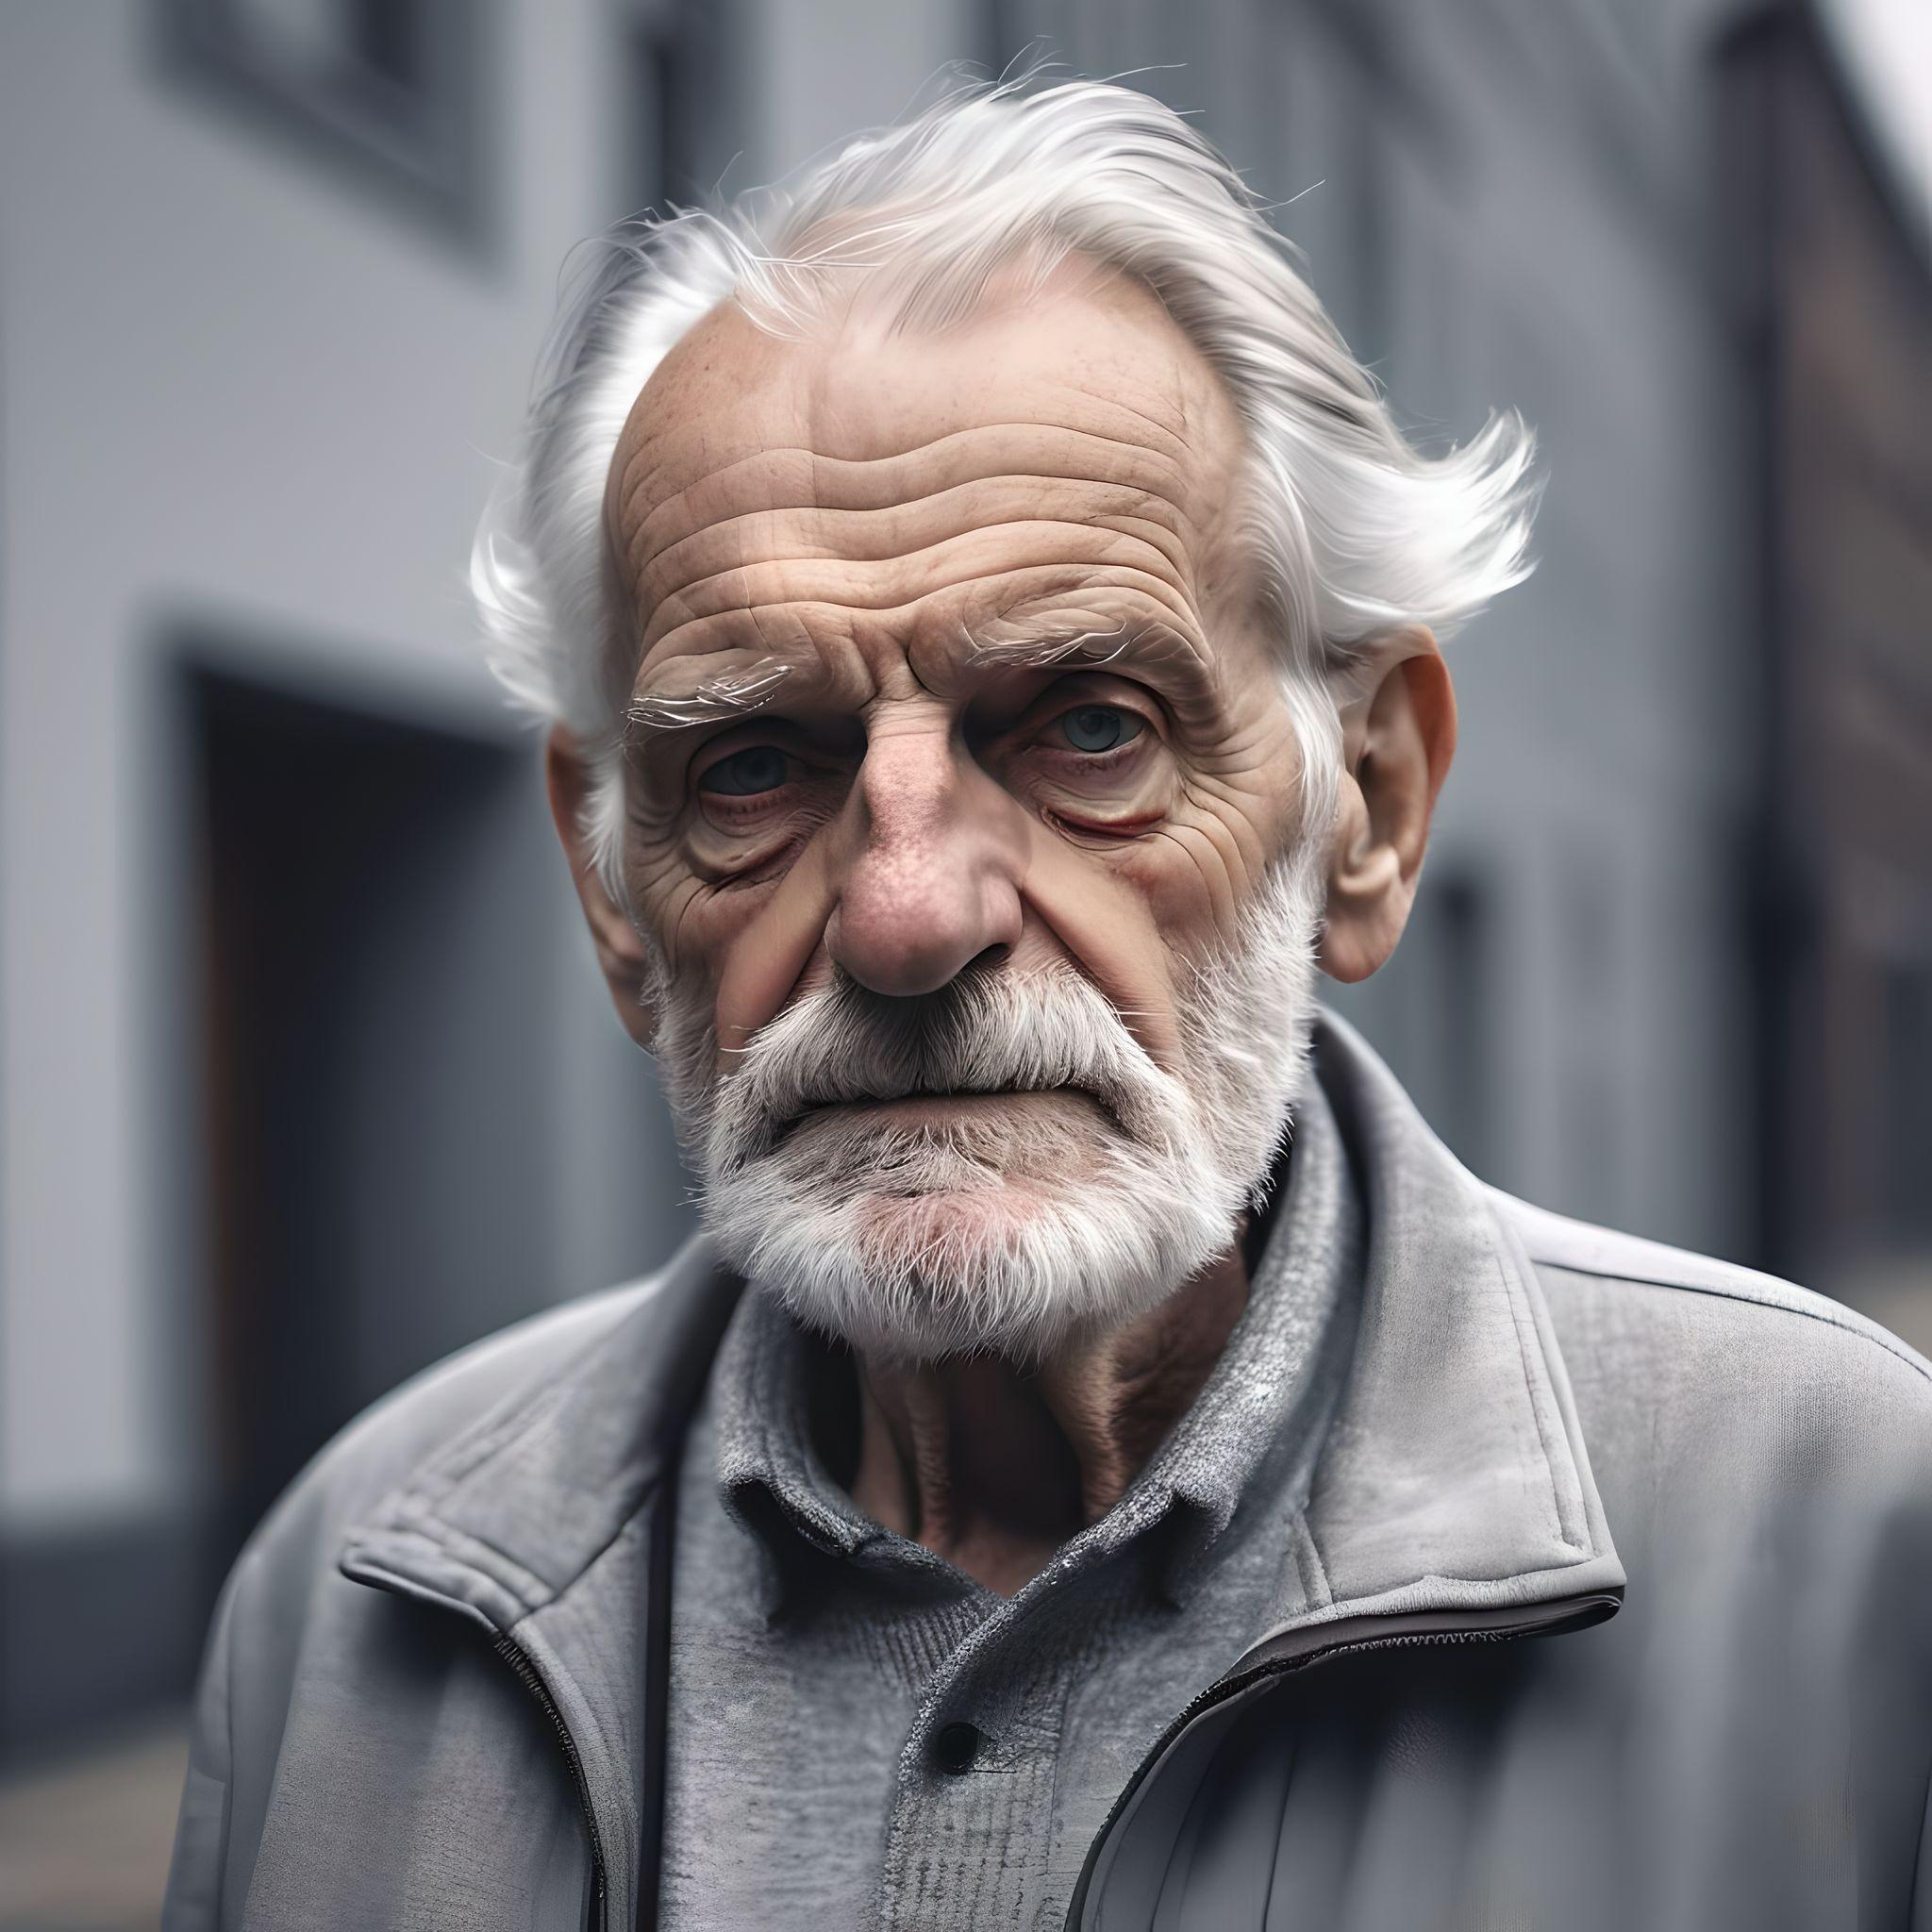 A photograph of an old man wearing a gray jacket with a minimalist look